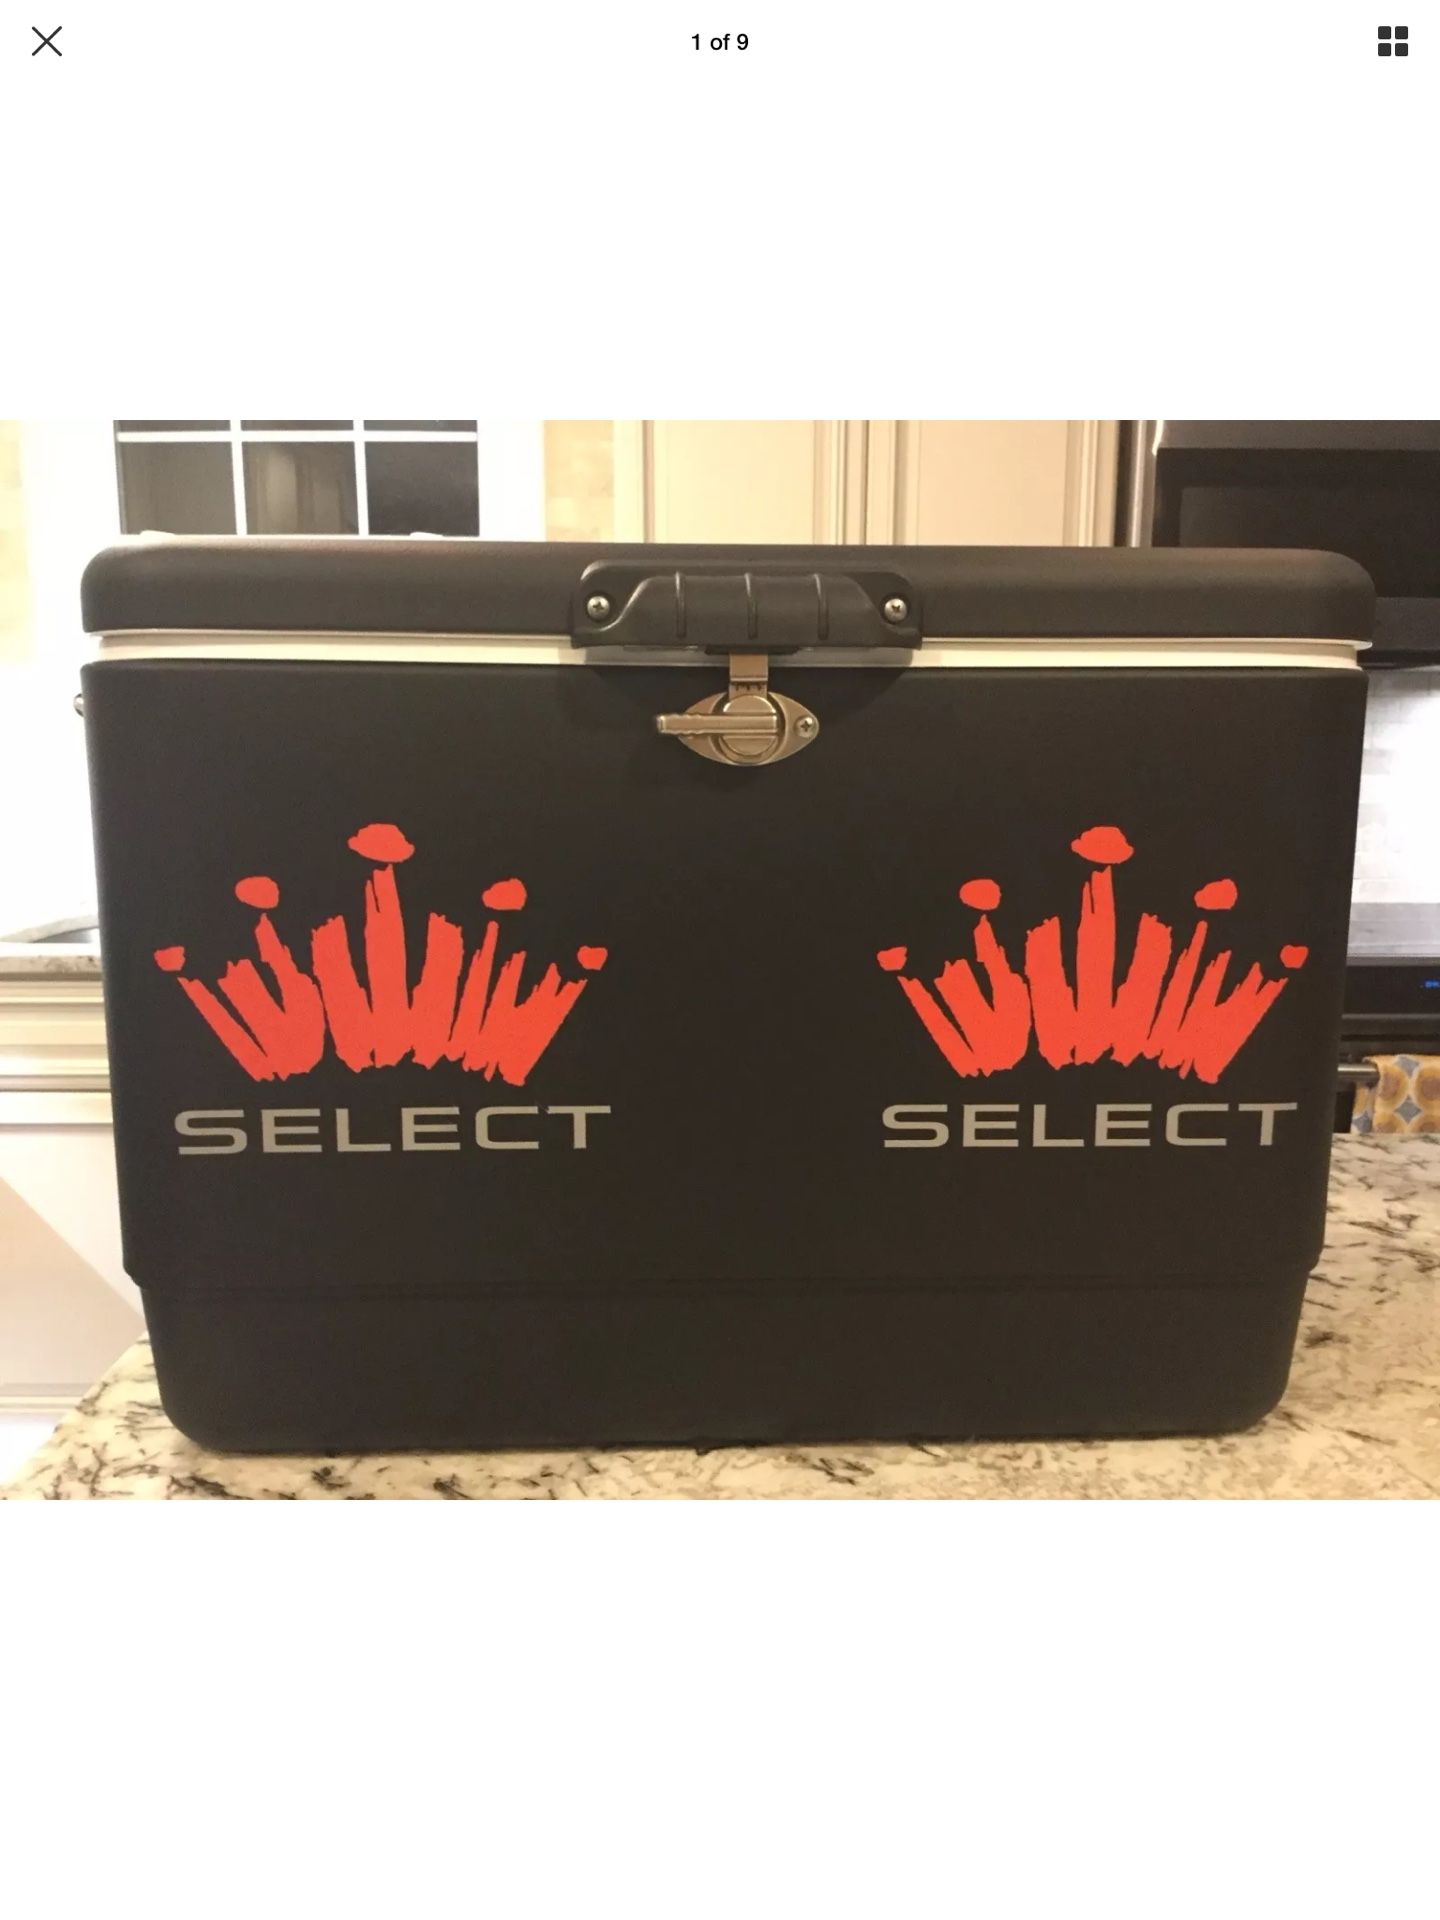 RARE!! ONE OF A KIND!! New Budweiser Select Steel Belted Coleman cooler 54 quarts.